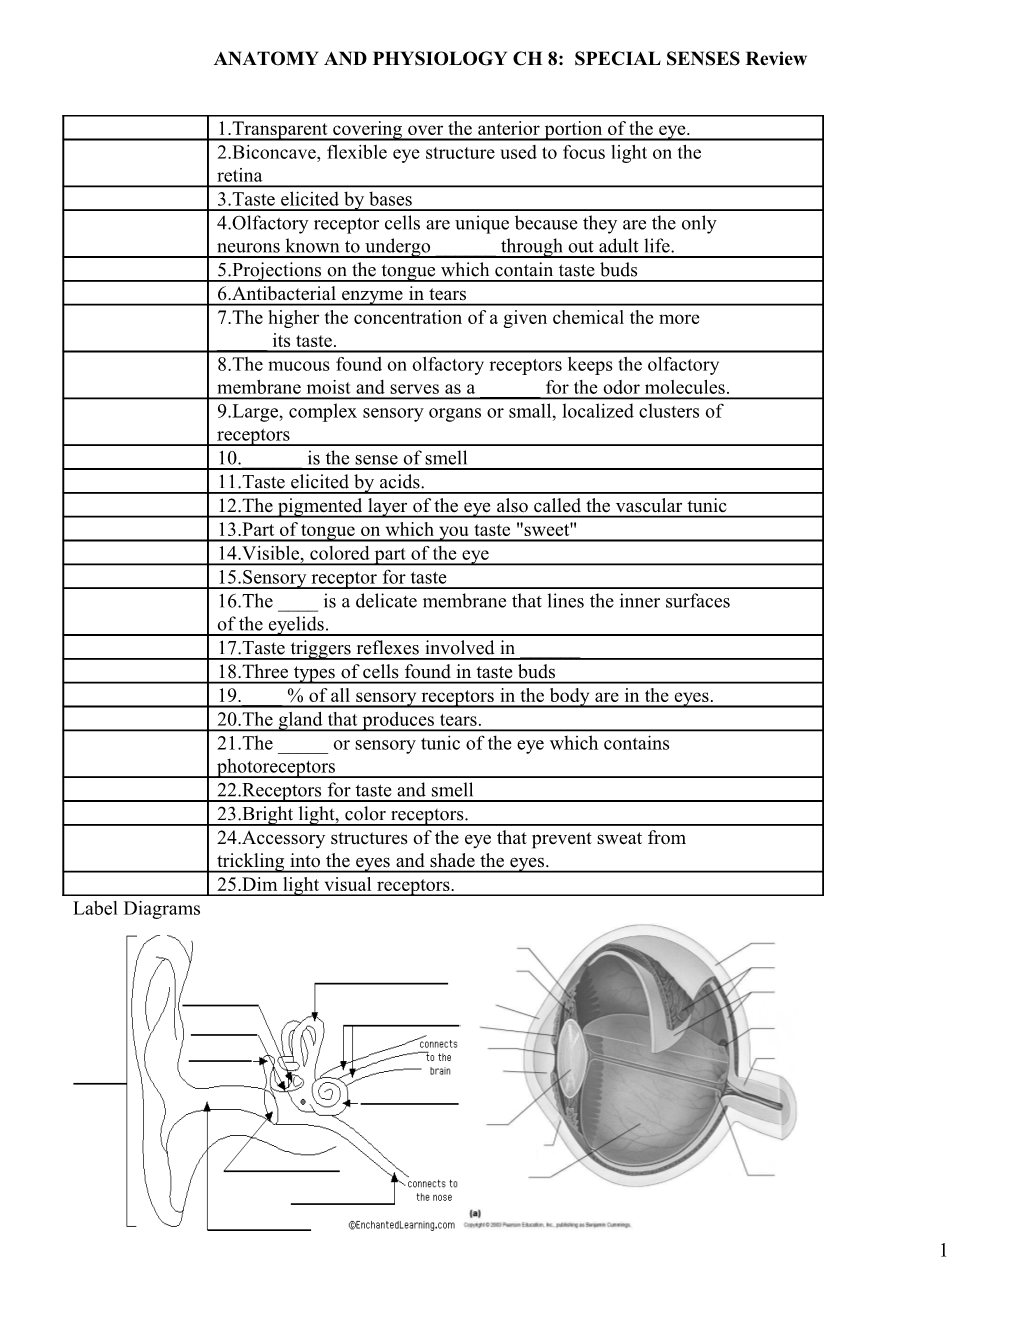 Anatomy and Physiology Ch 16: Special Senses Worksheet